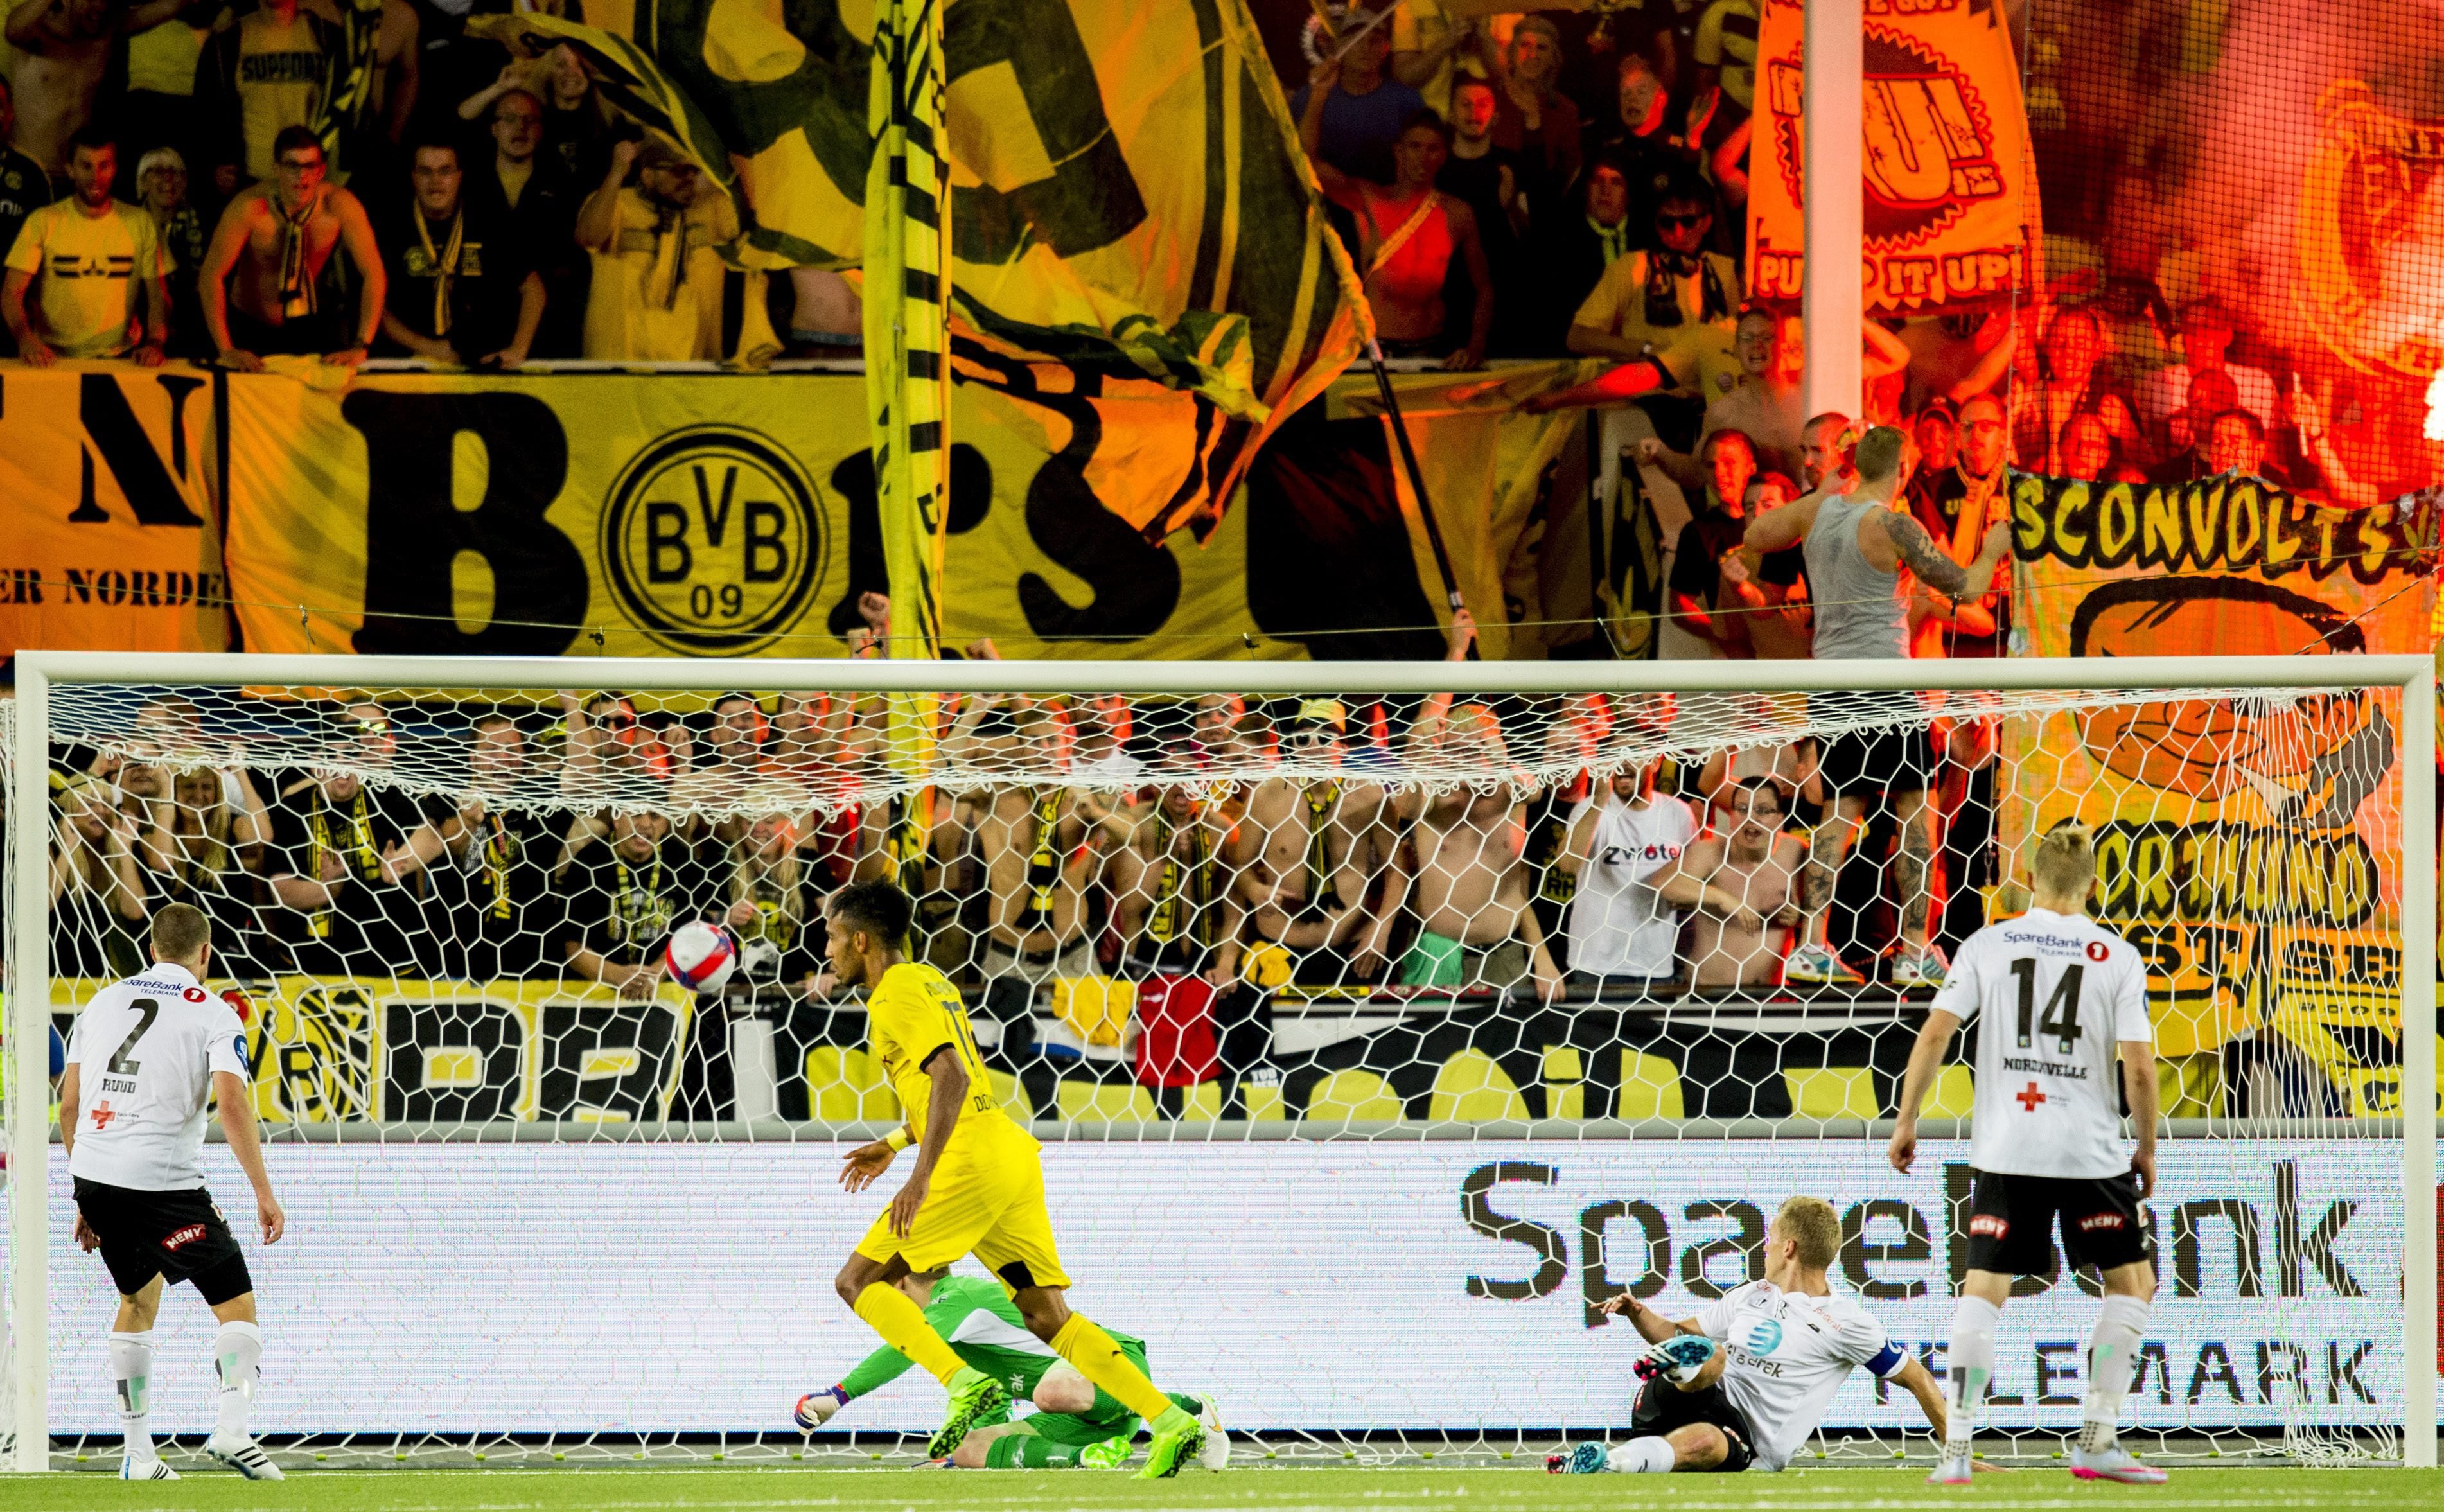 Borussia Dortmund fought back from 3-0 down to securwe a first leg win against Norwegian side Odd. Photo: EPA